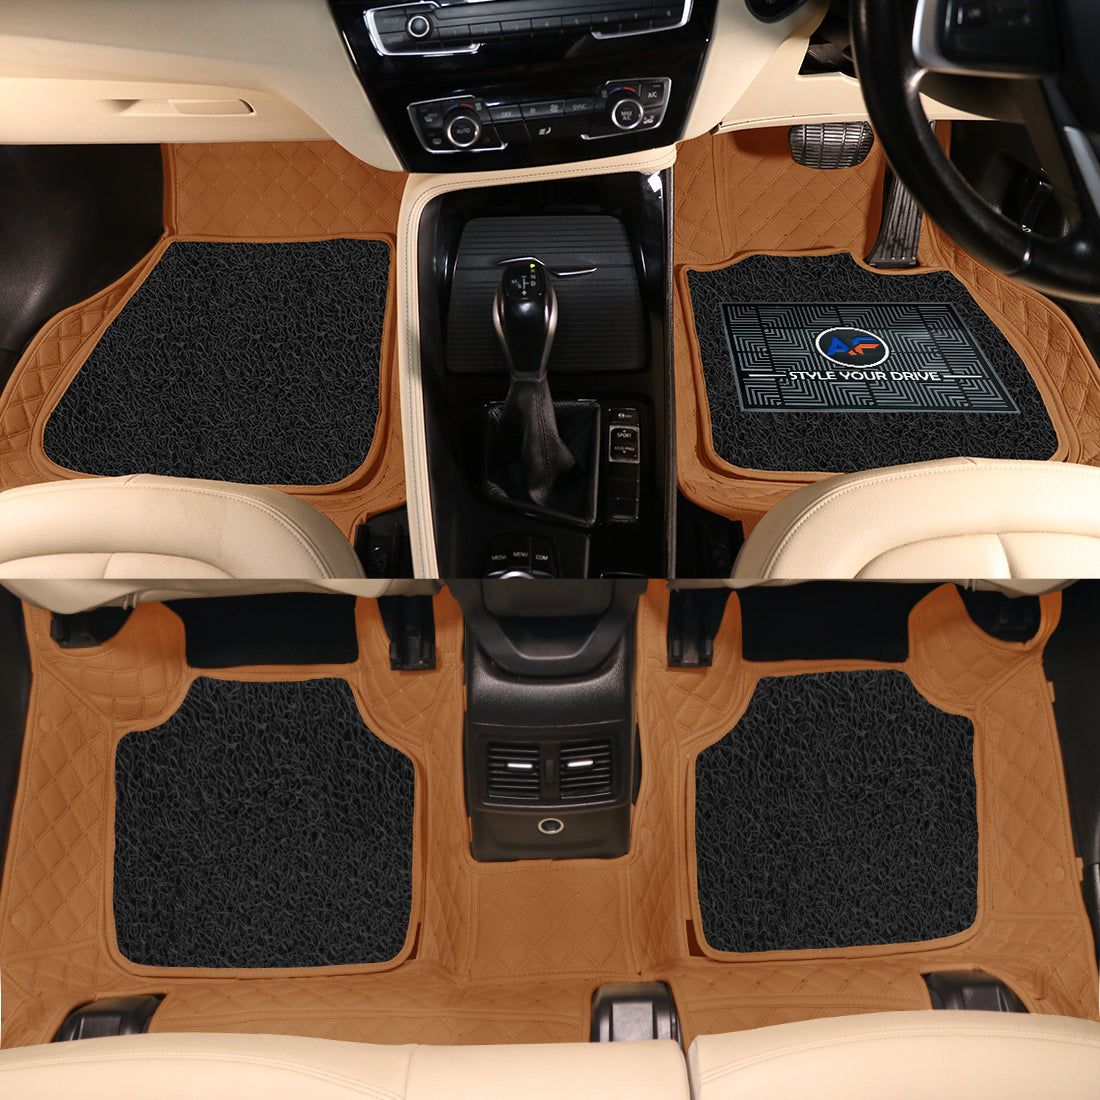 Land Rover Discovery Sport R-Dynamic (7 Seater) 2020 7D Luxury Car Mat, All Weather Proof, Anti-Skid, 100% Waterproof & Odorless with Unique Diamond Fish Design (24mm Luxury PU Leather, 2 Rows)